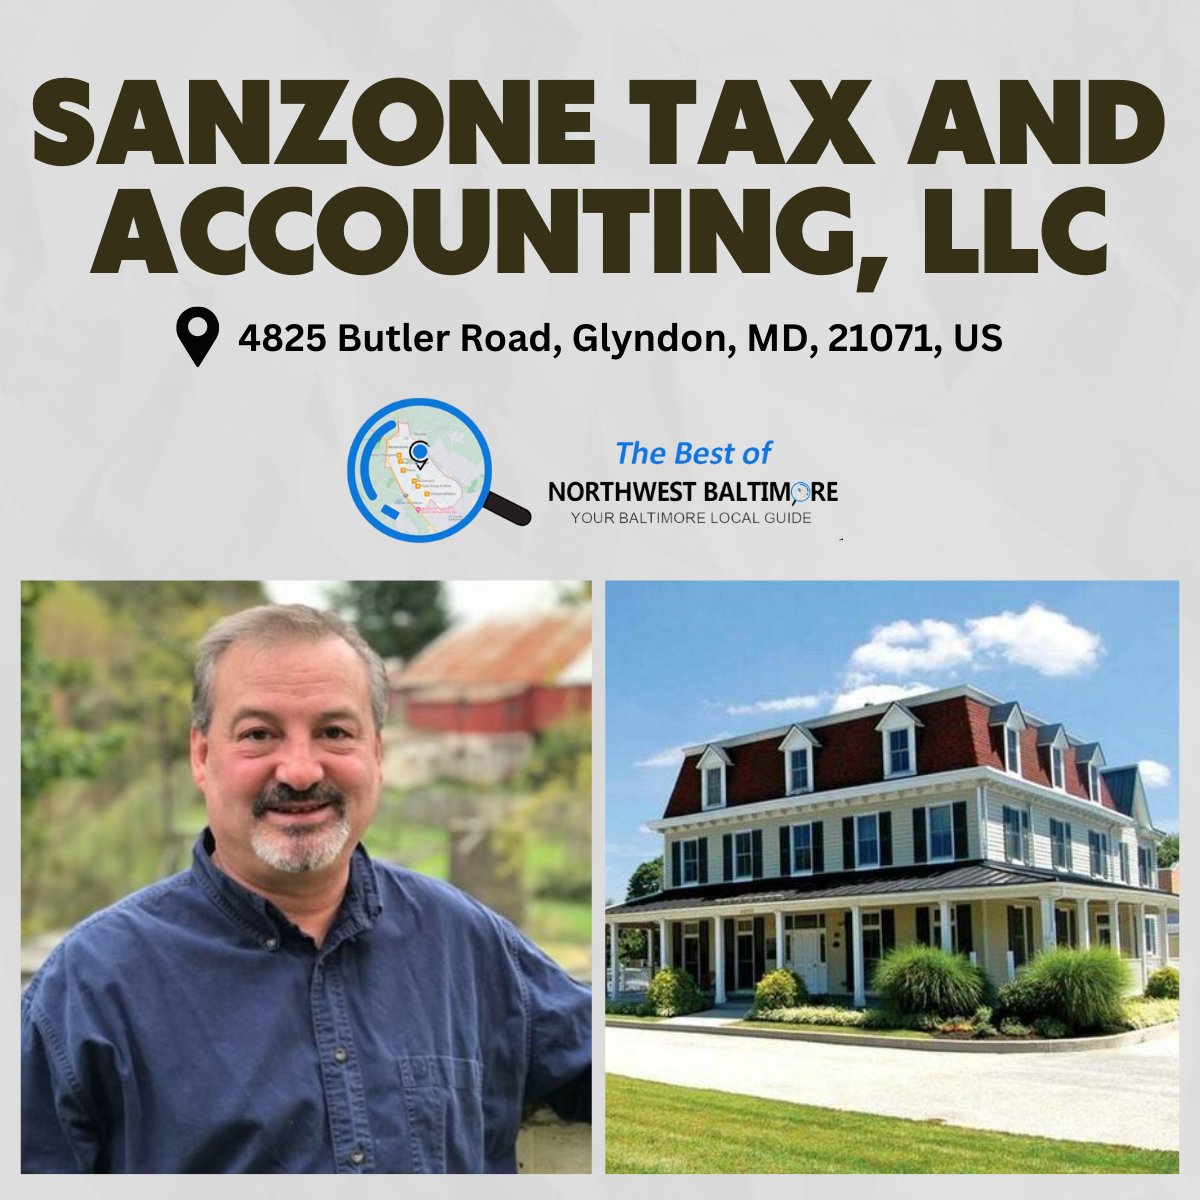 Their team has grown and includes experienced CPAs and dedicated support to provide both personal and professional financial services. #sanzonetaxandaccounting #cpas #accountingcompany 
northwestbaltimore.com/listings/sanzo… 

#ShopLocal #LiveLocal #LoveLocal #FoodieParadise #MarylandFlavors